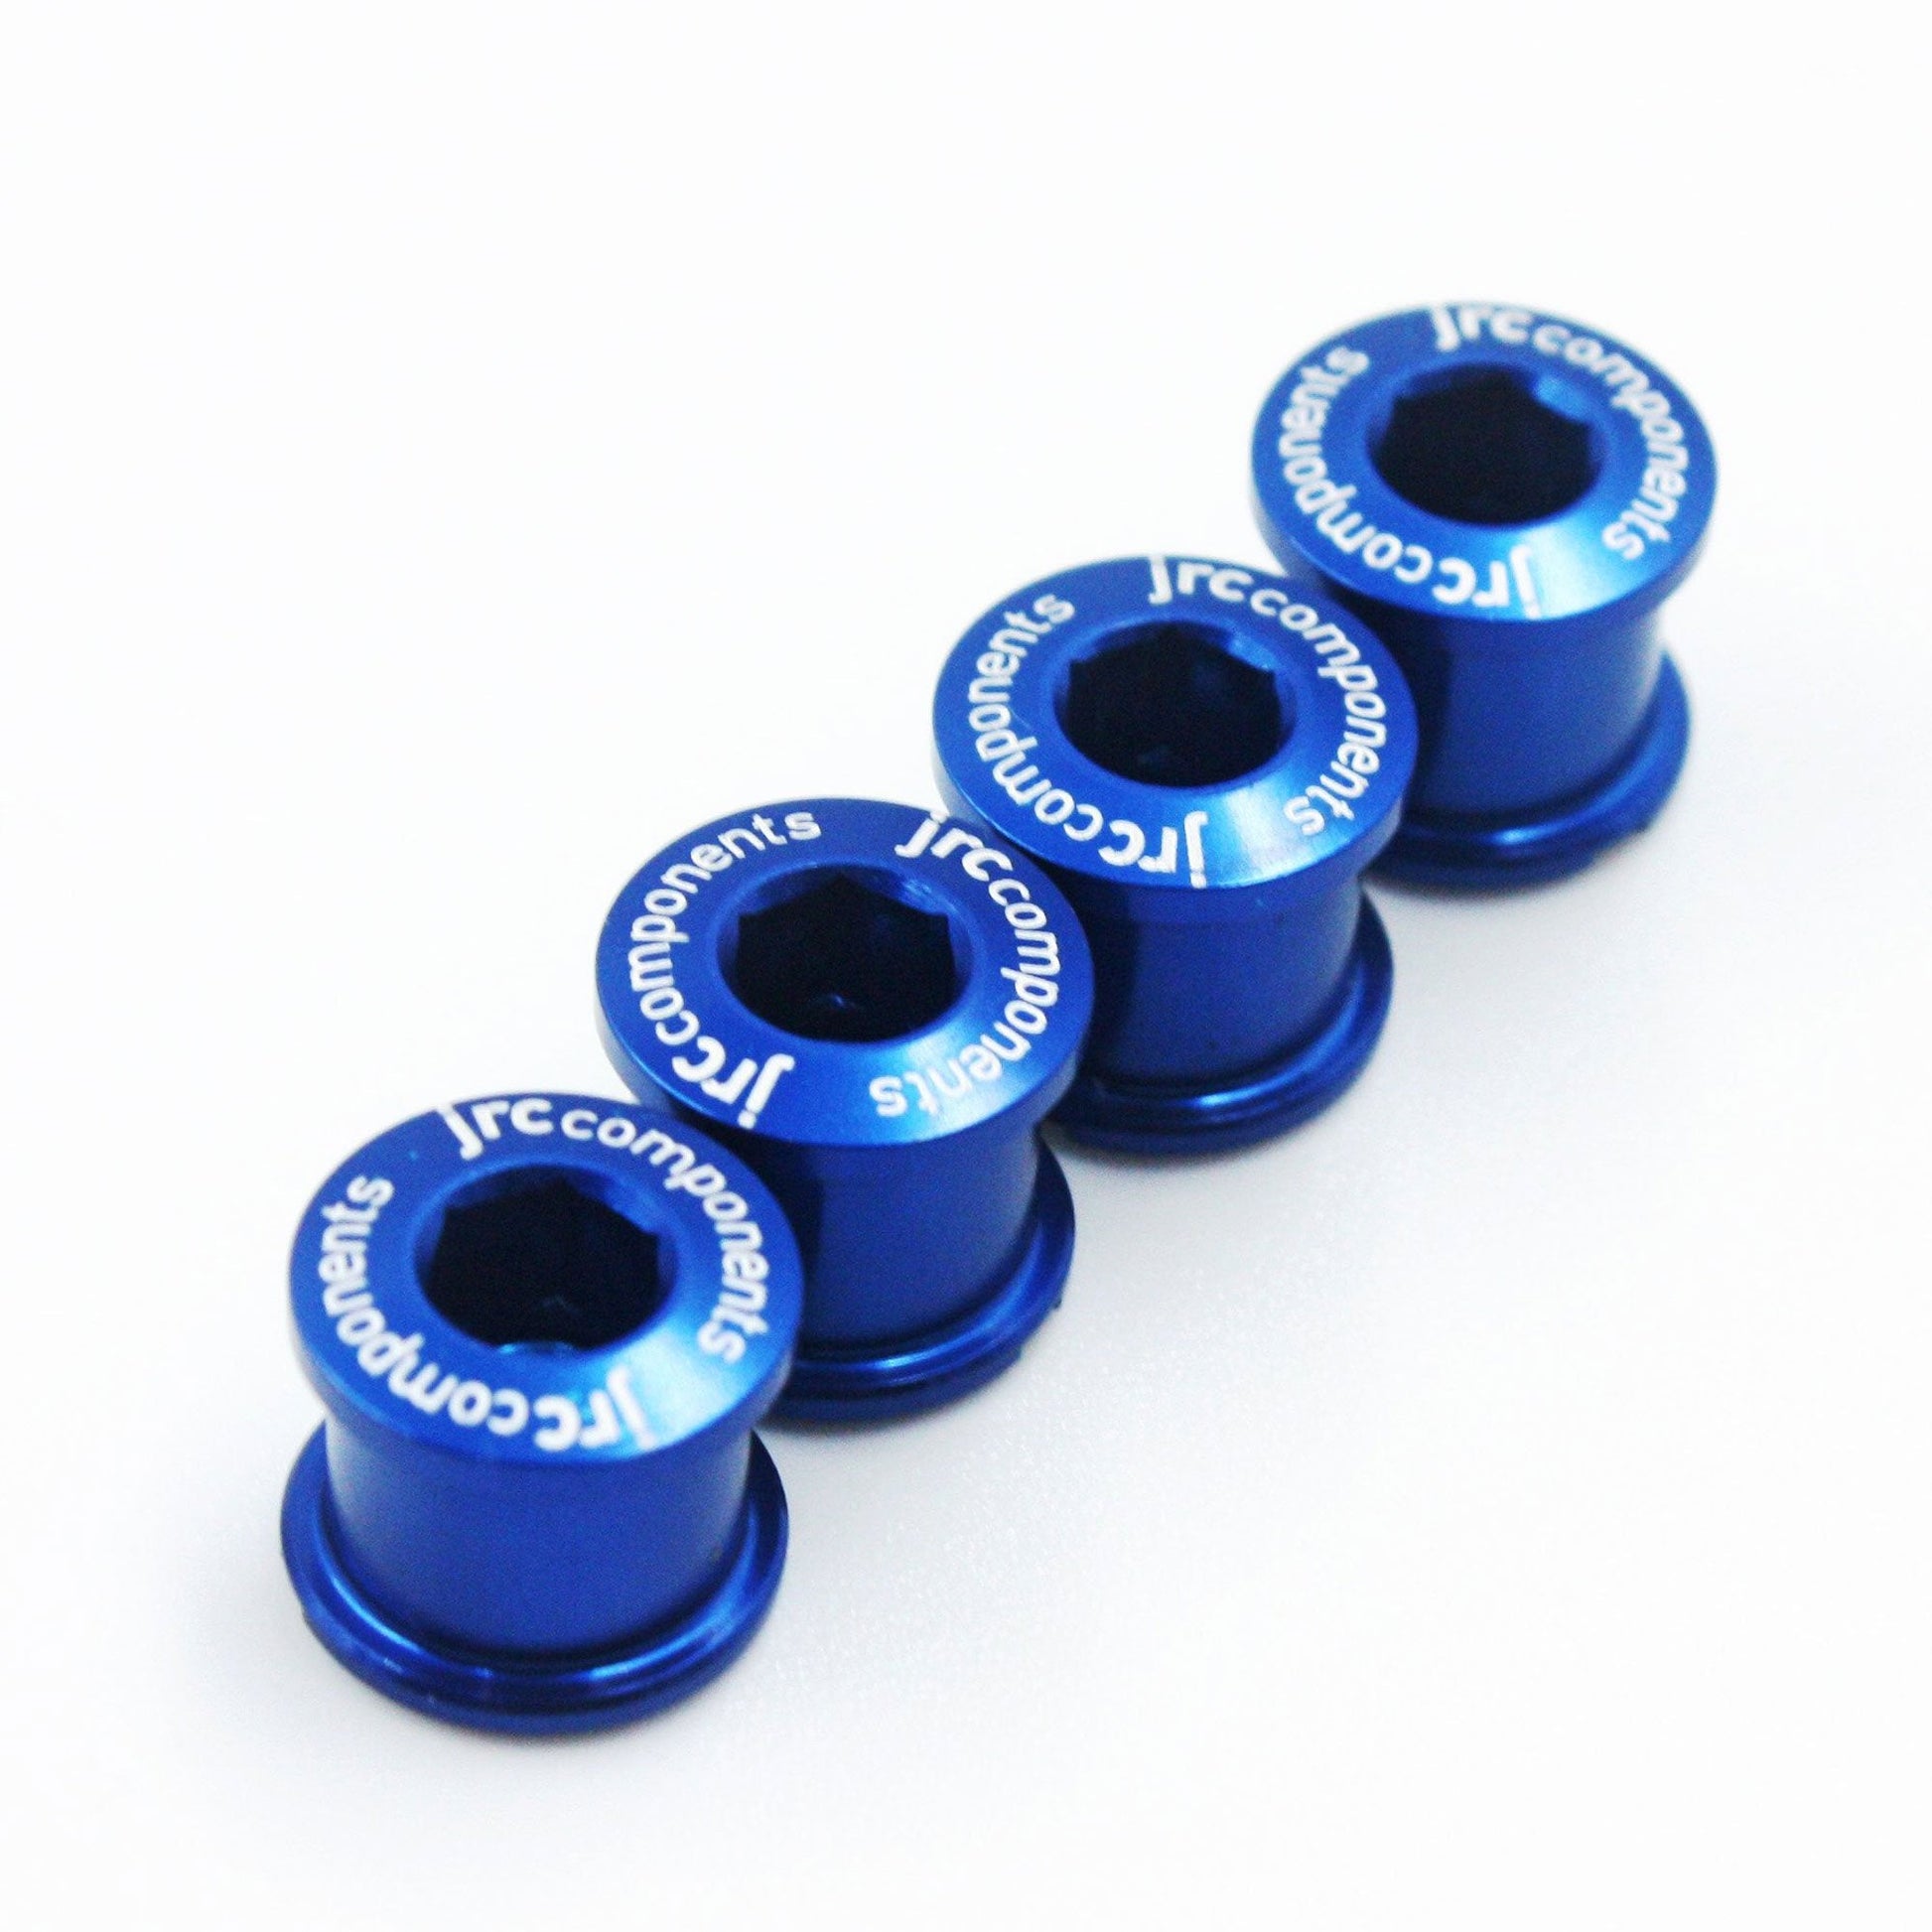 JRC Components Lightweight Bicycle Components Aluminium And Anodized Chainring Bolts Double And Triple Chainring Set Up With M8 Bolts Long And Short 4 Pack In Blue